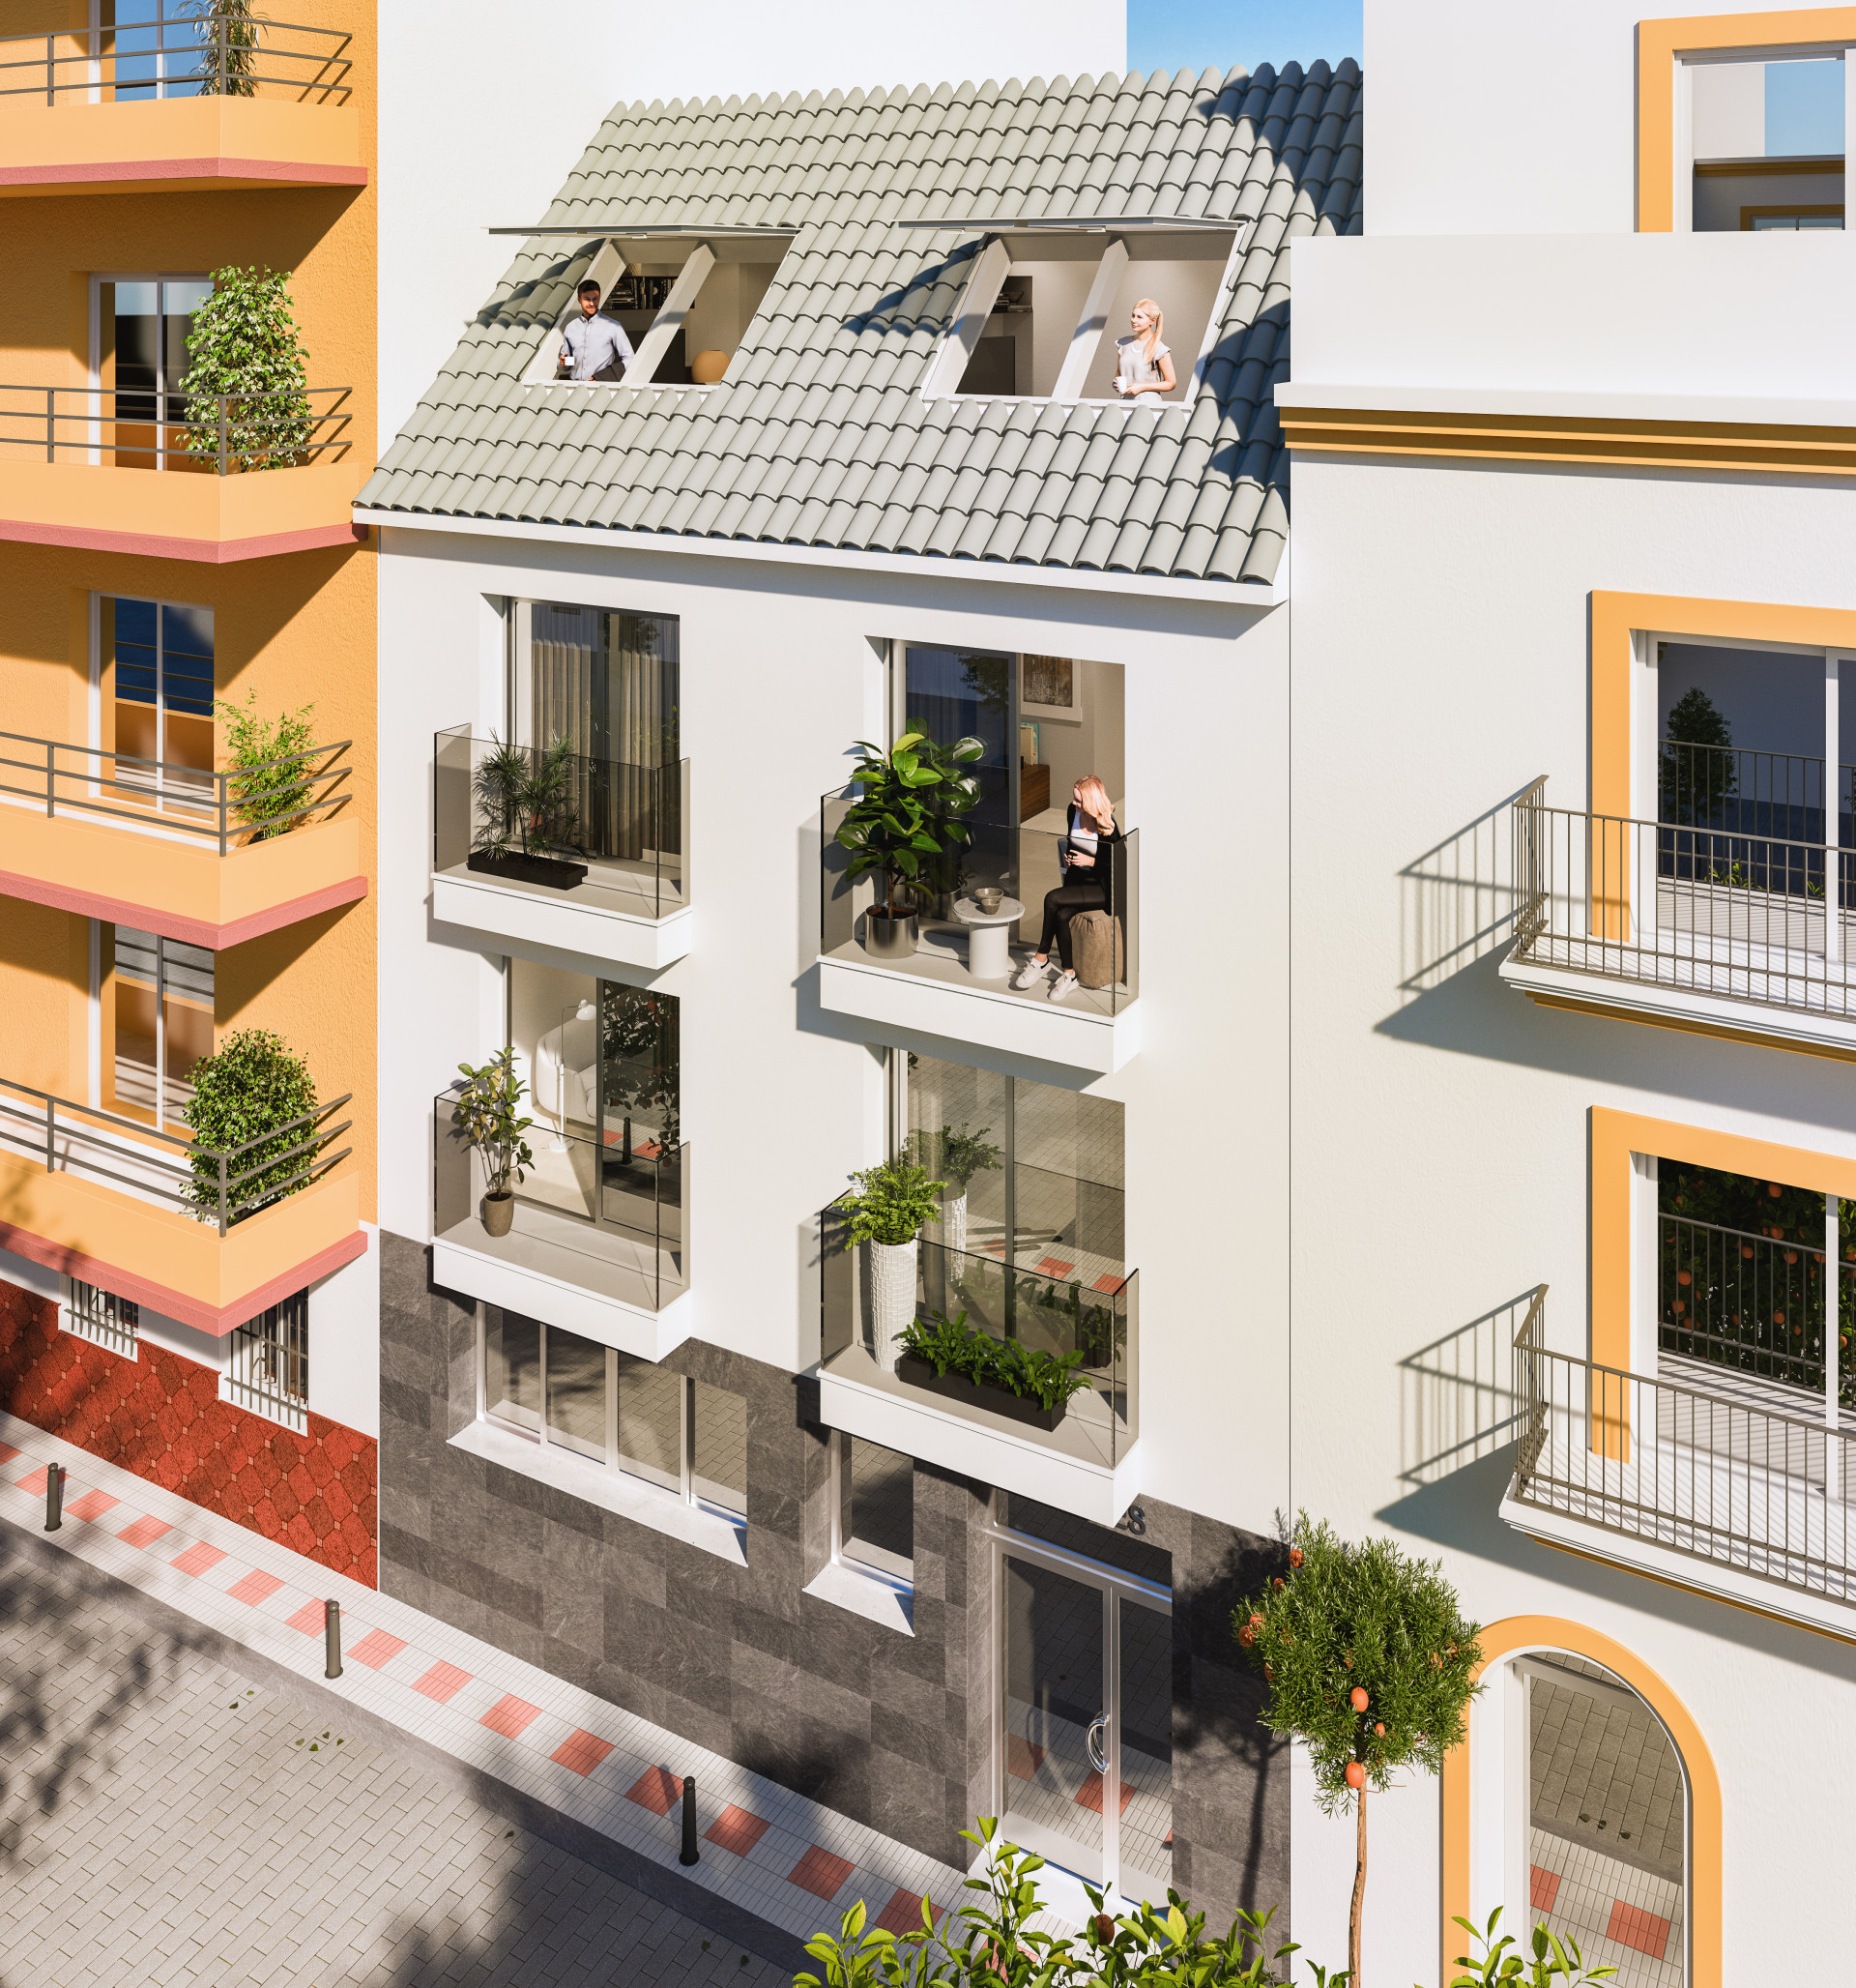 New boutique development of modern apartments for sale in the heart of Fuengirola